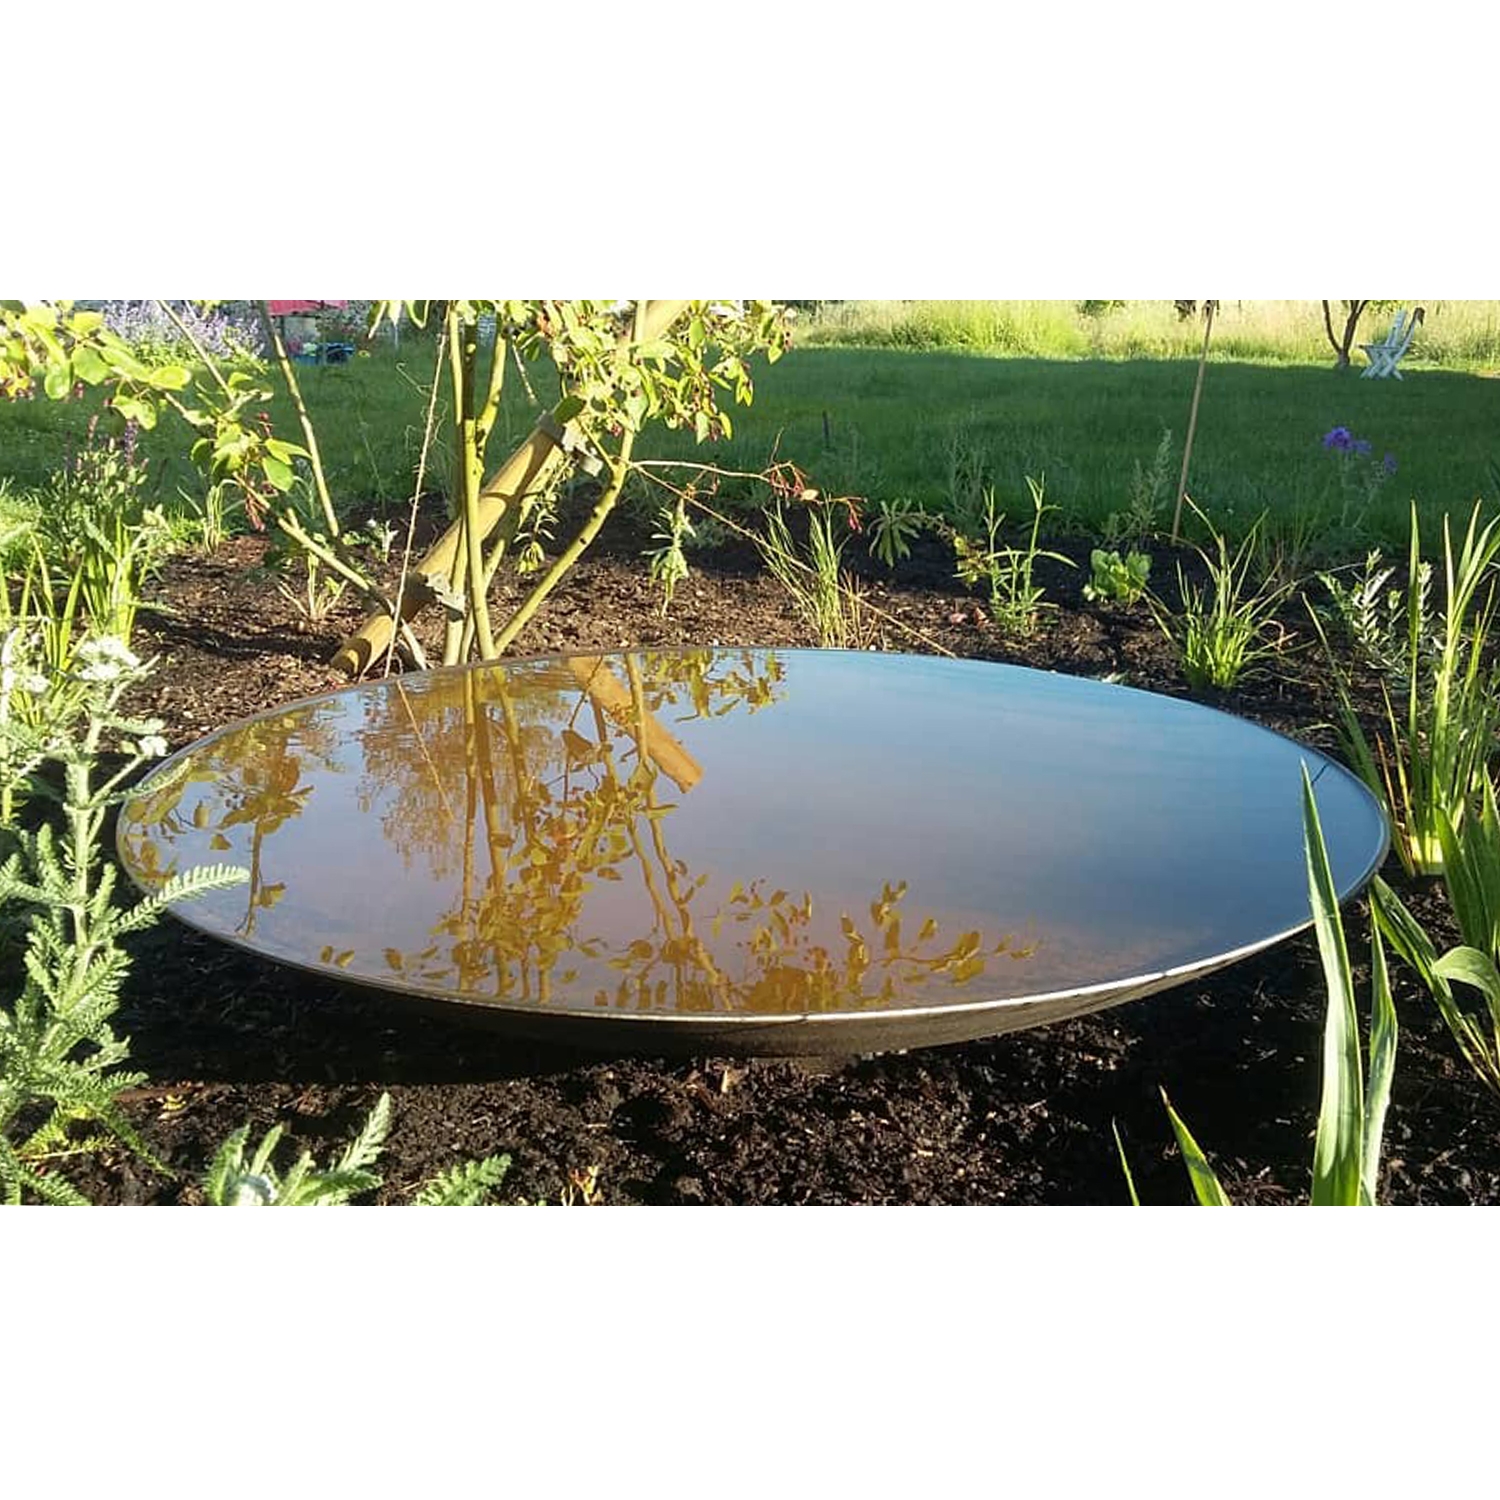 Large Curved Water Bowl - Corten Steel